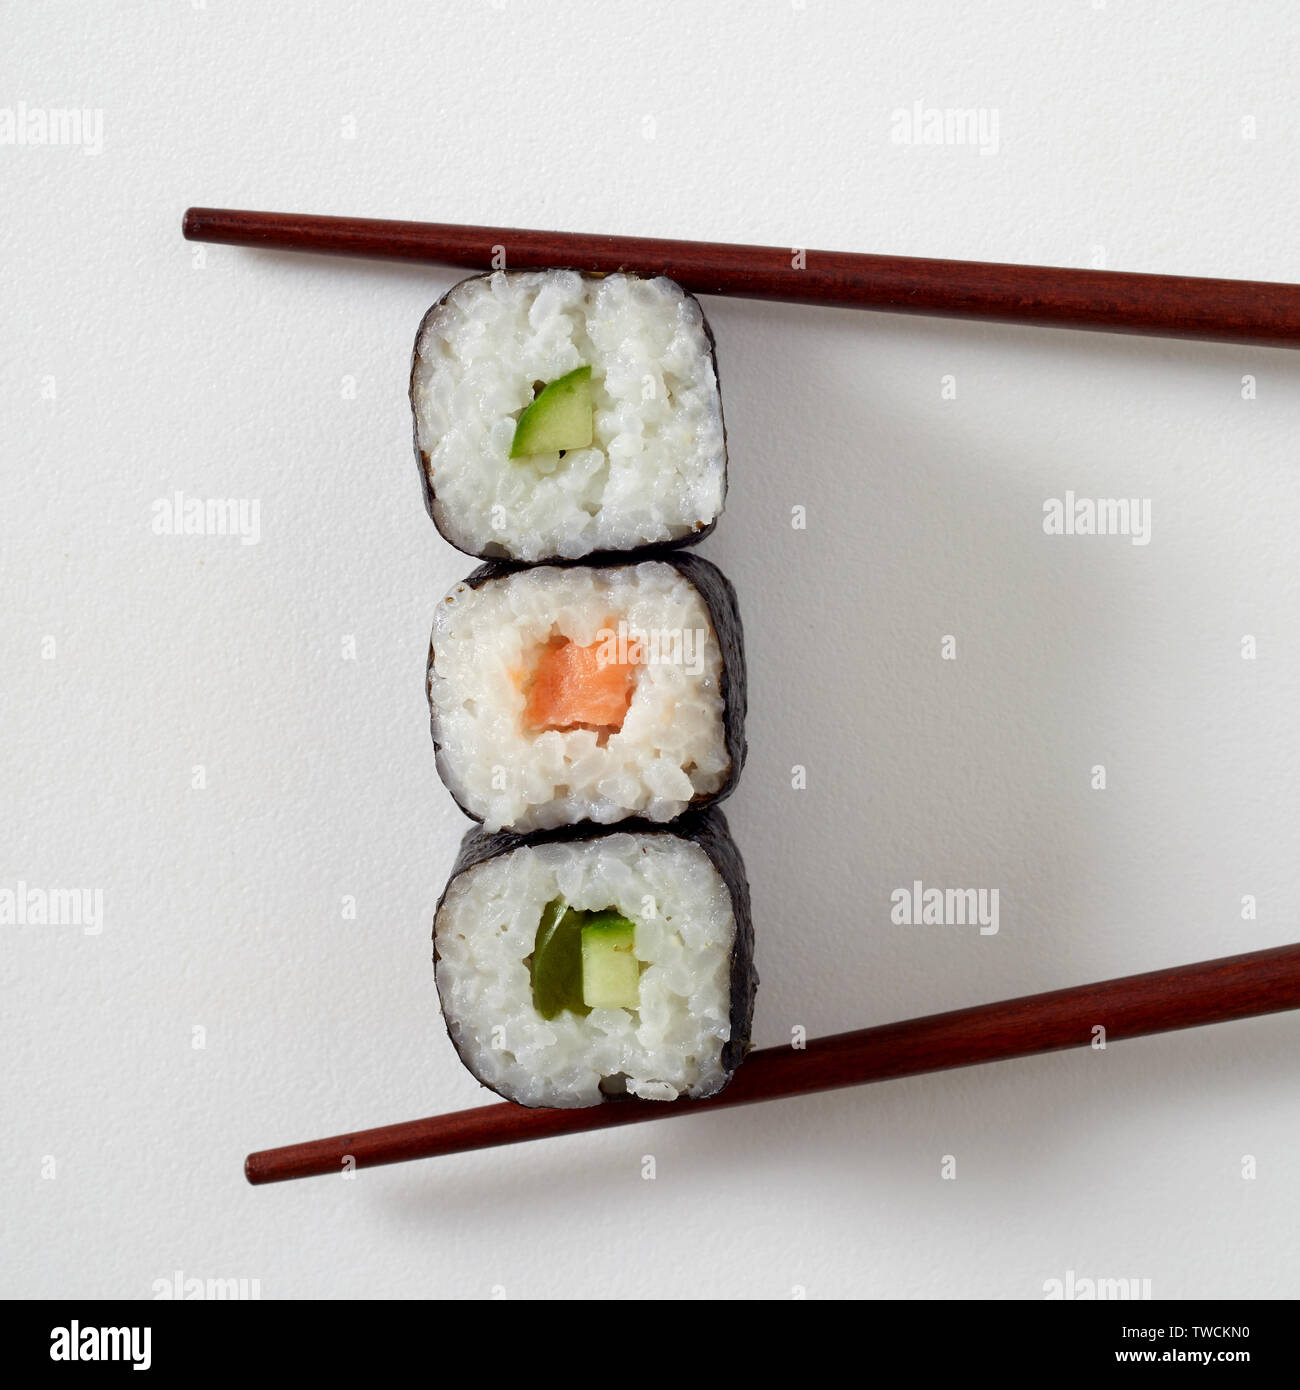 Food styling concept with three maki sushi rolls with nori seaweed, salmon and avocado pear placed between bamboo chopsticks on white with copy space Stock Photo